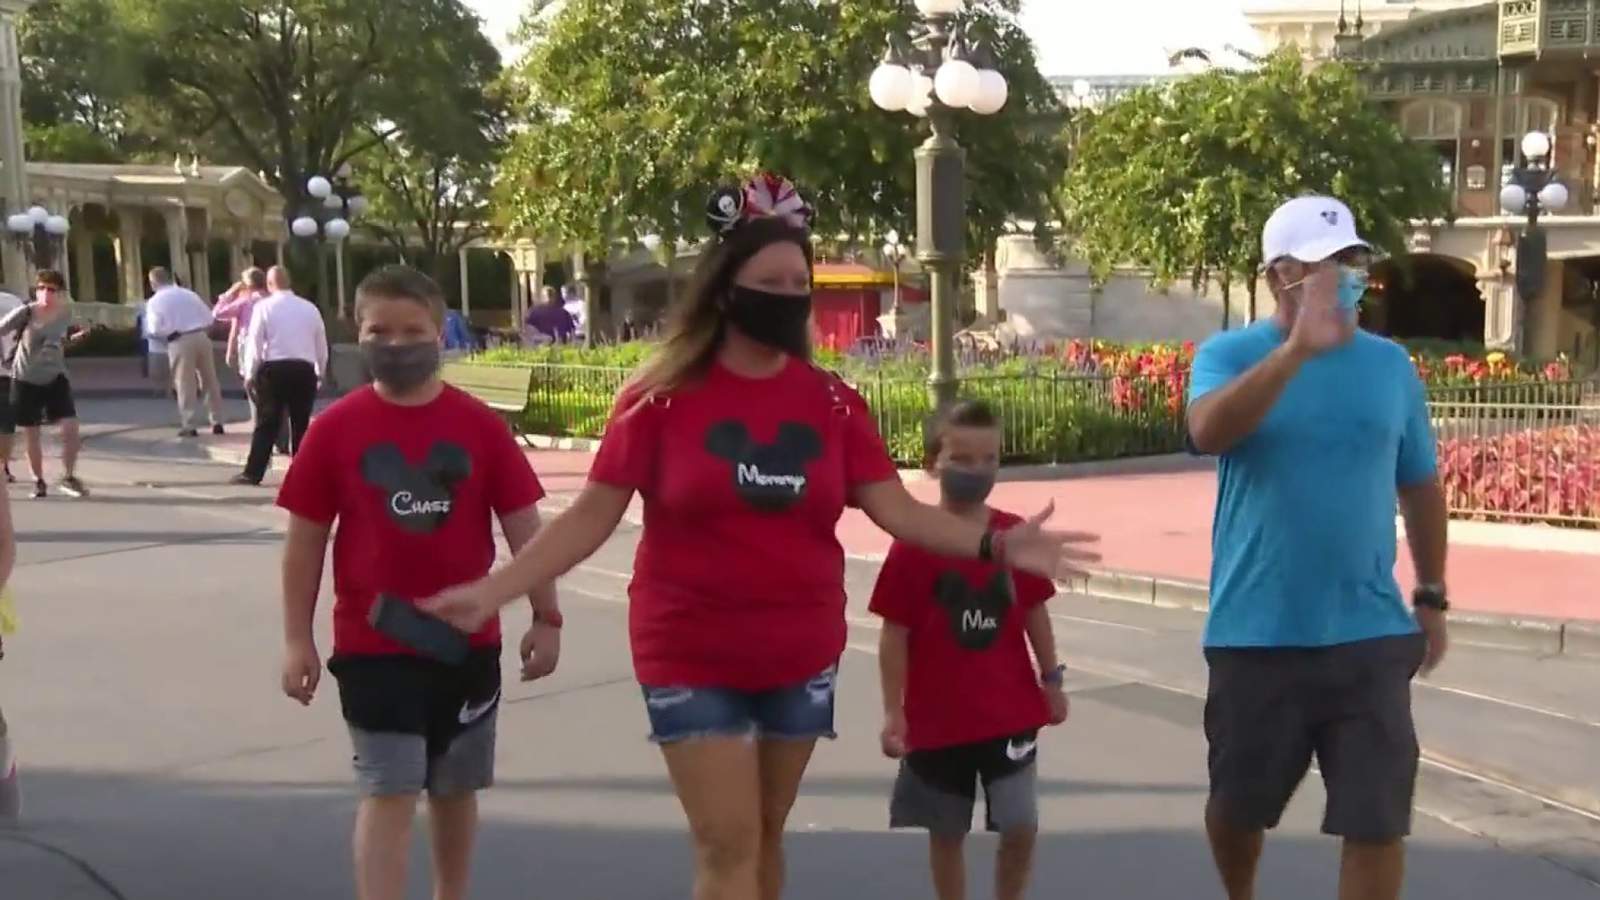 Disney theme parks will likely require masks through 2021